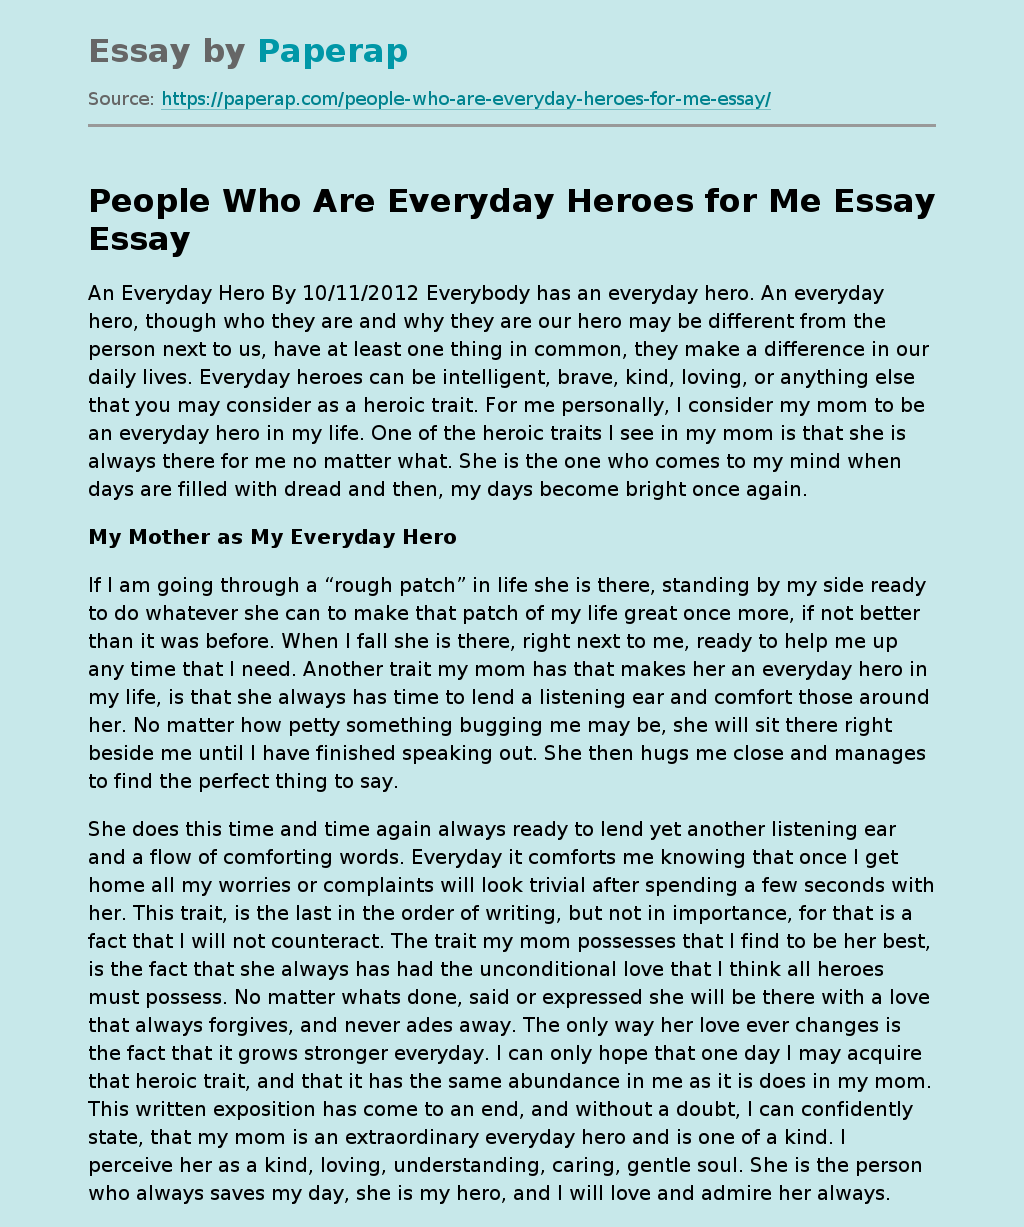 People Who Are Everyday Heroes for Me Essay